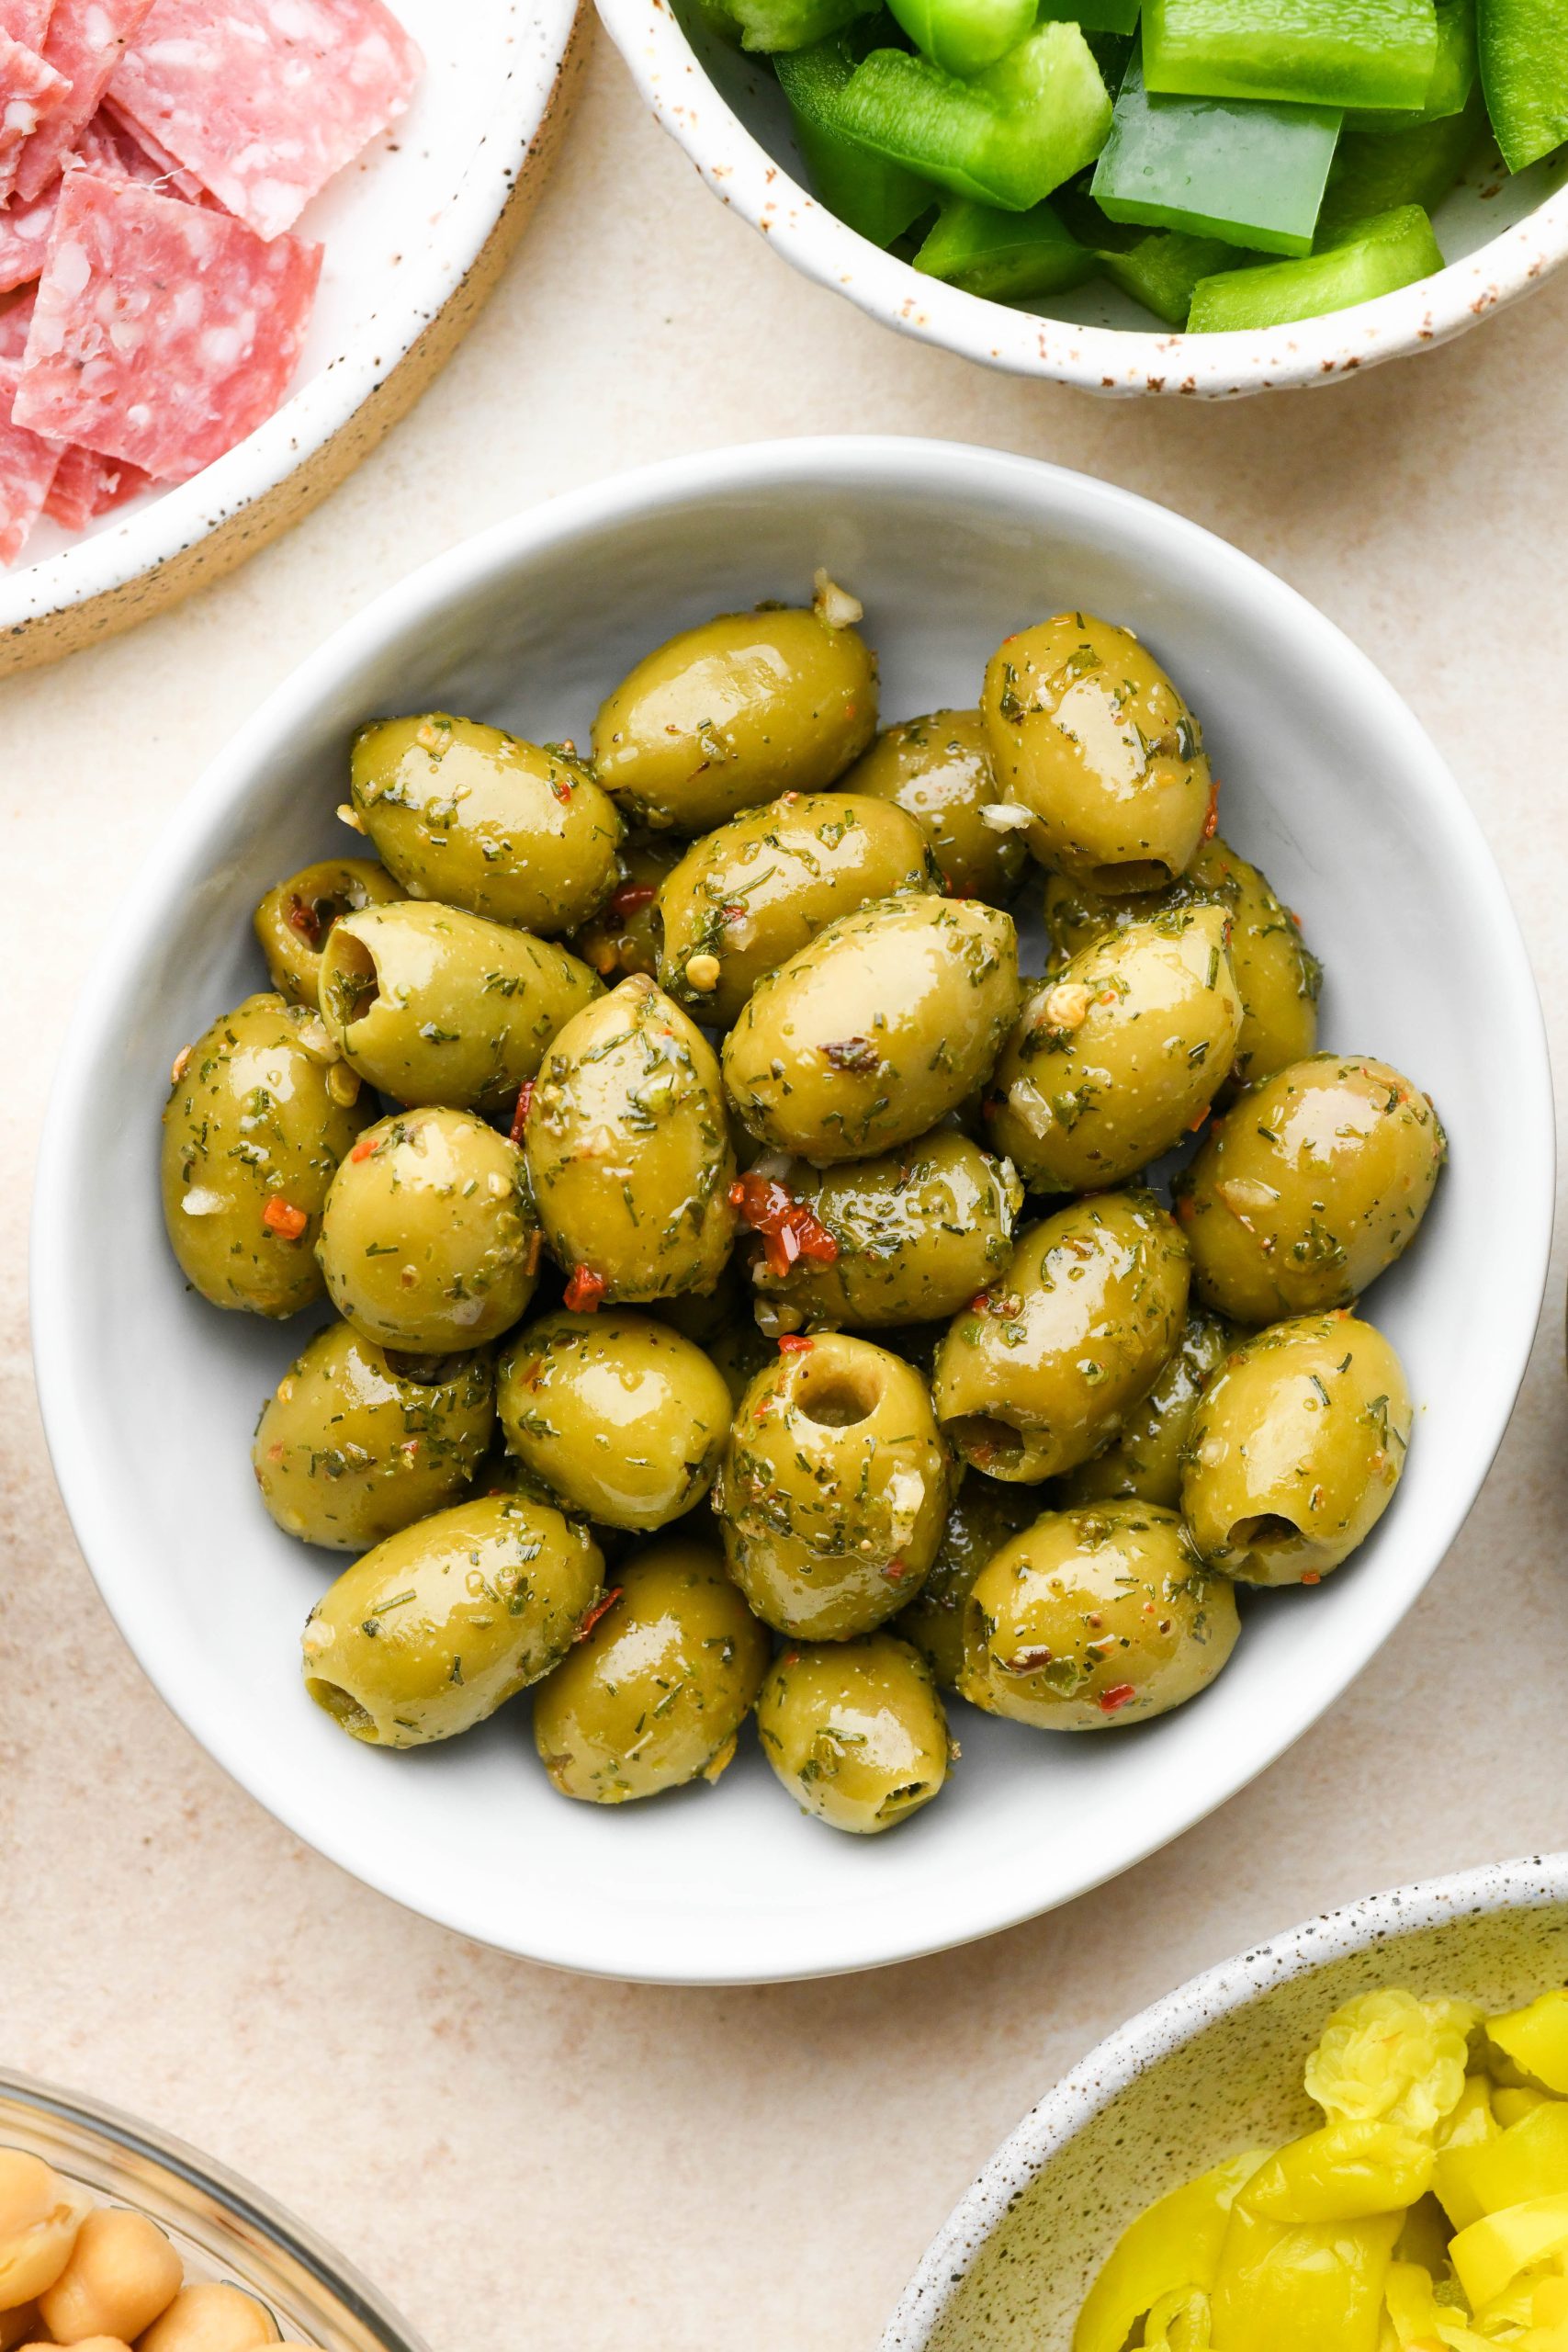 Herby olives in a small white ceramic bowl on a cream colored background.